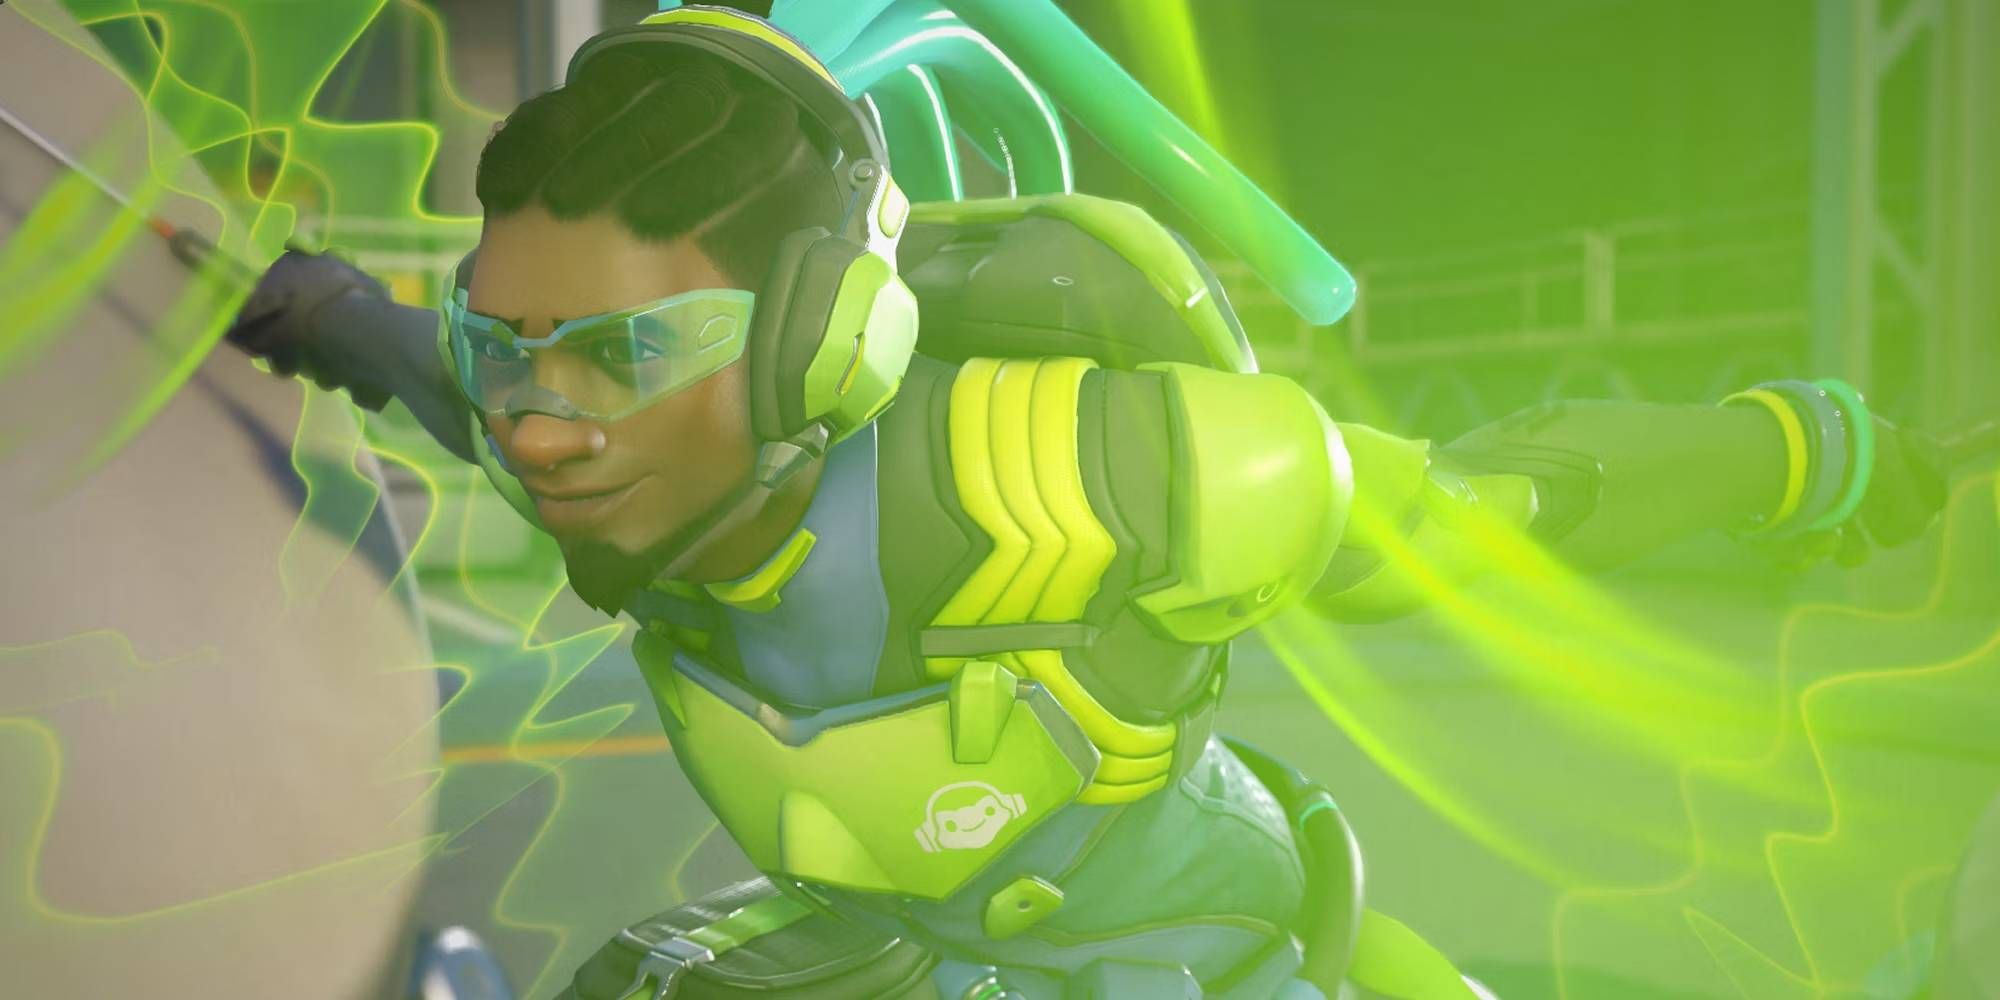 Overwatch 2 Lucio Using Sound Barrier Ultimate Ability Awash in Green Glow While Smiling